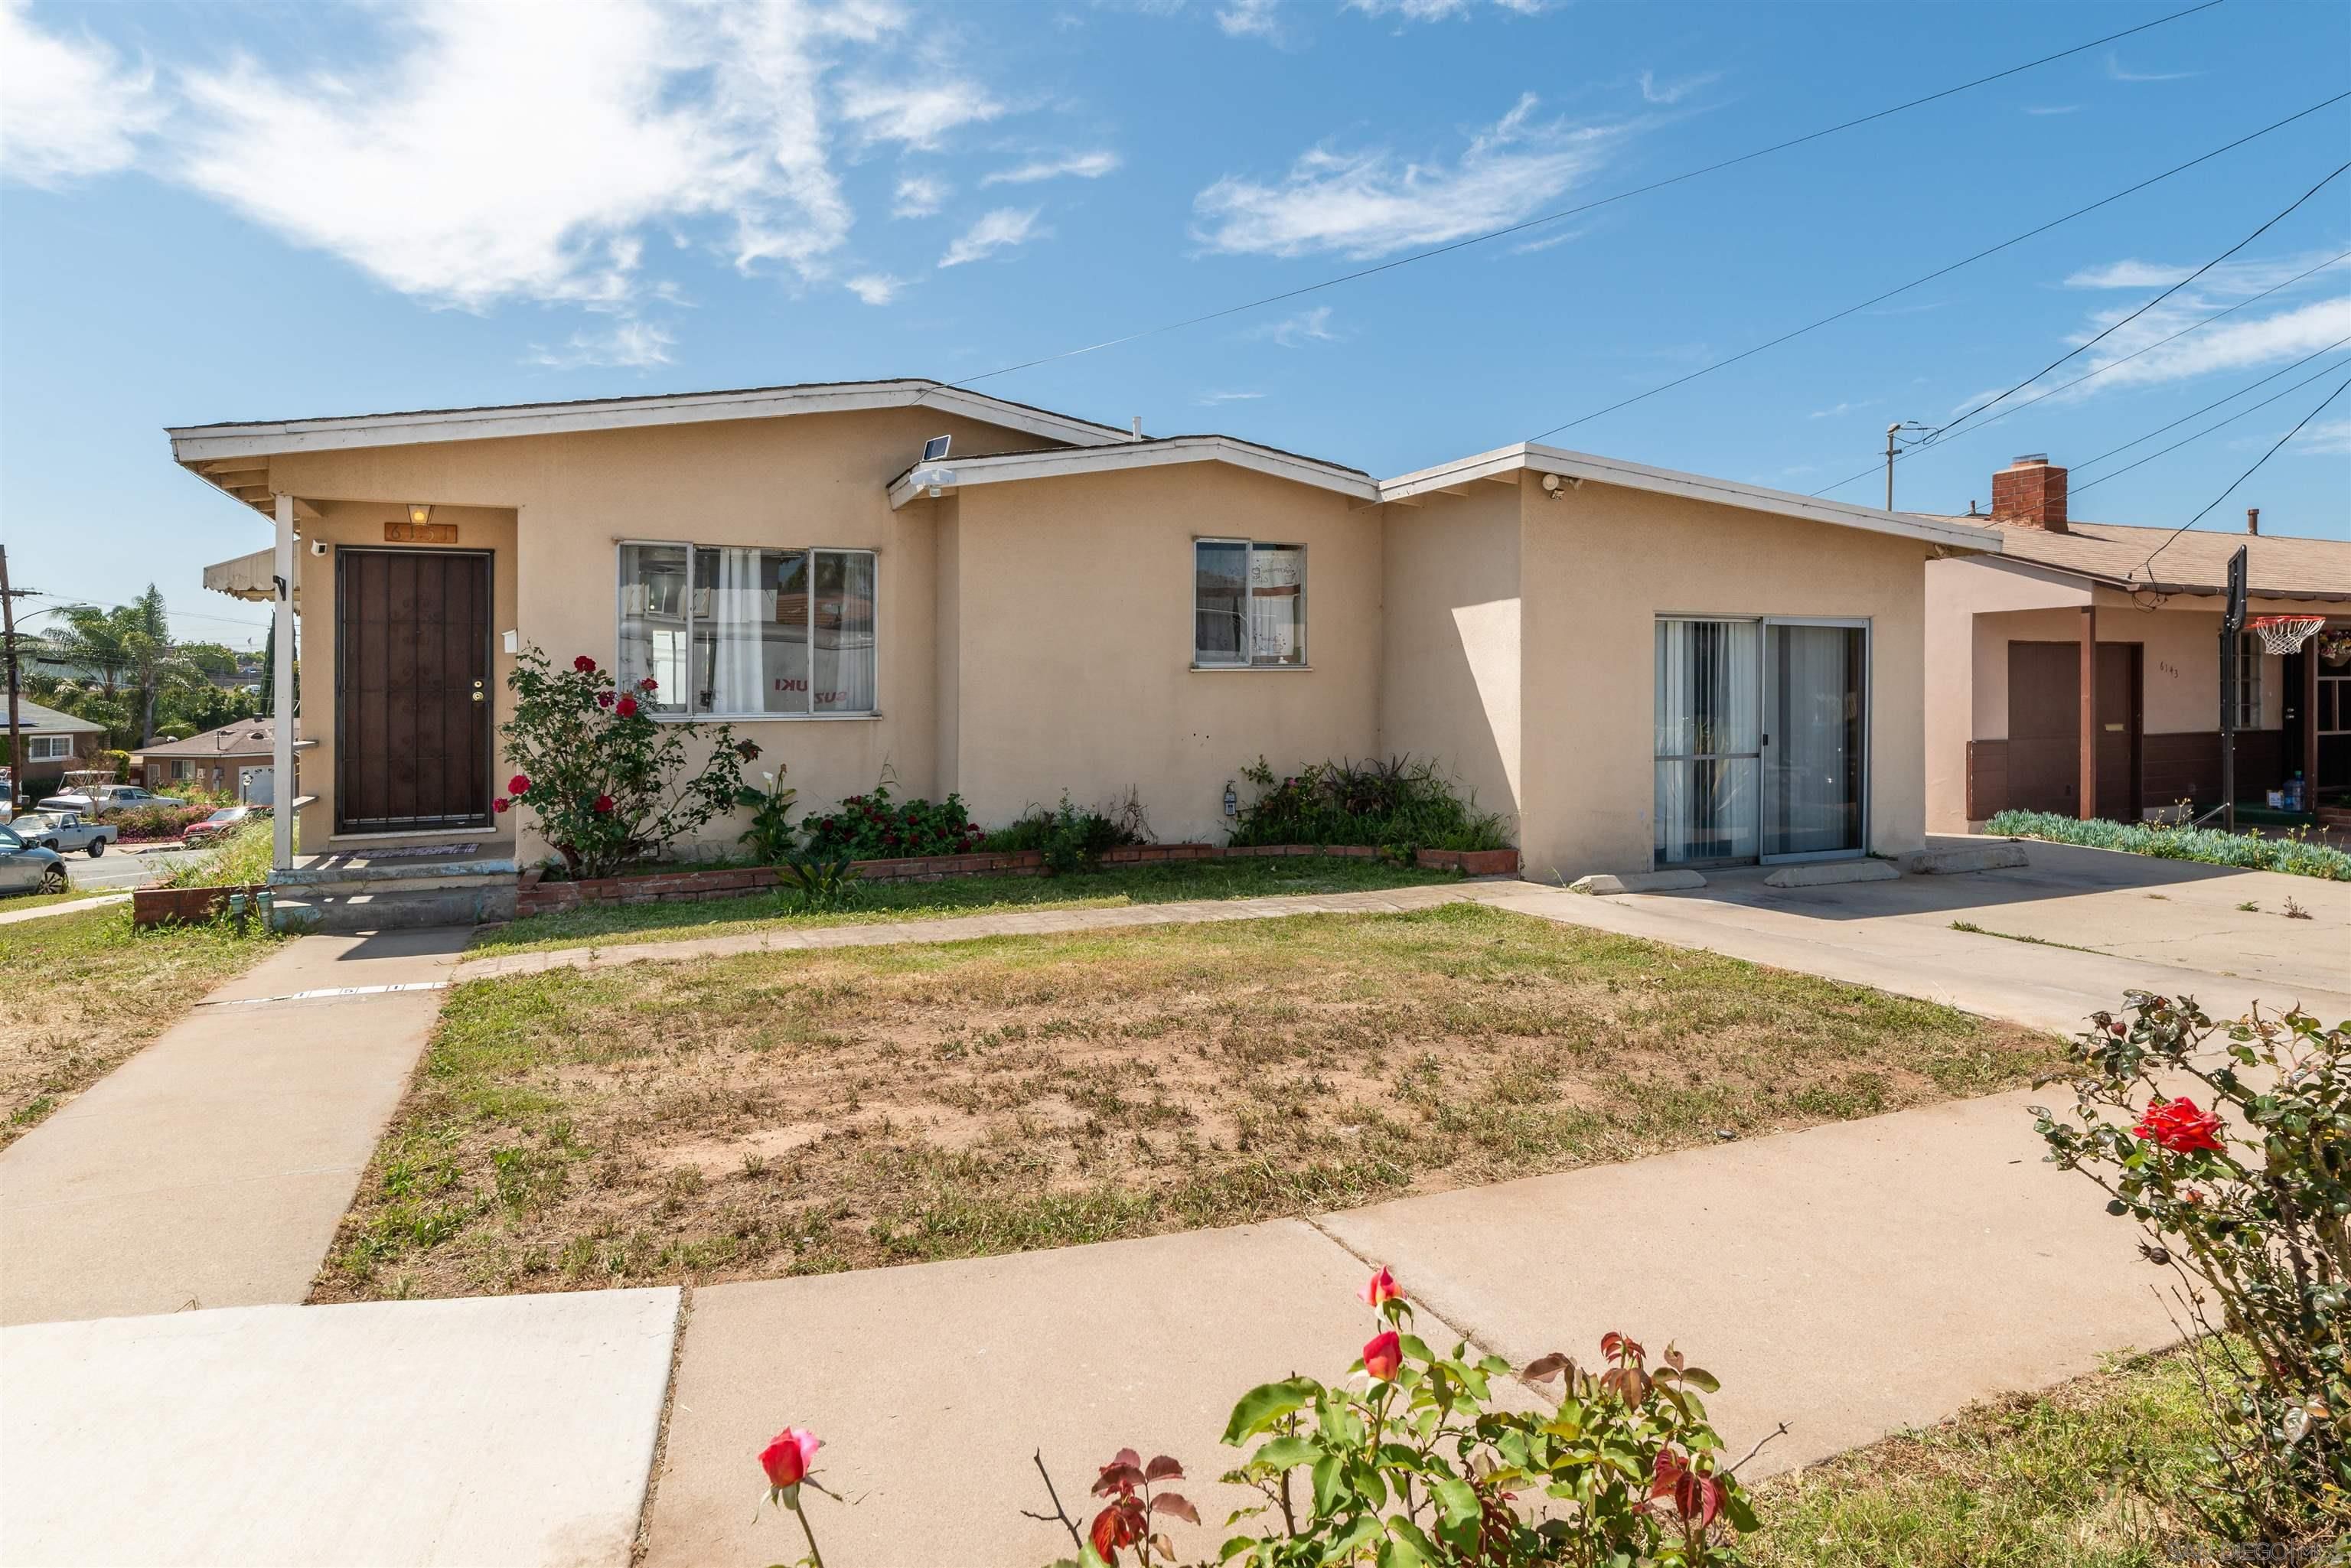 Main Photo: PARADISE HILLS House for sale : 4 bedrooms : 6151 Schuyler St in San Diego